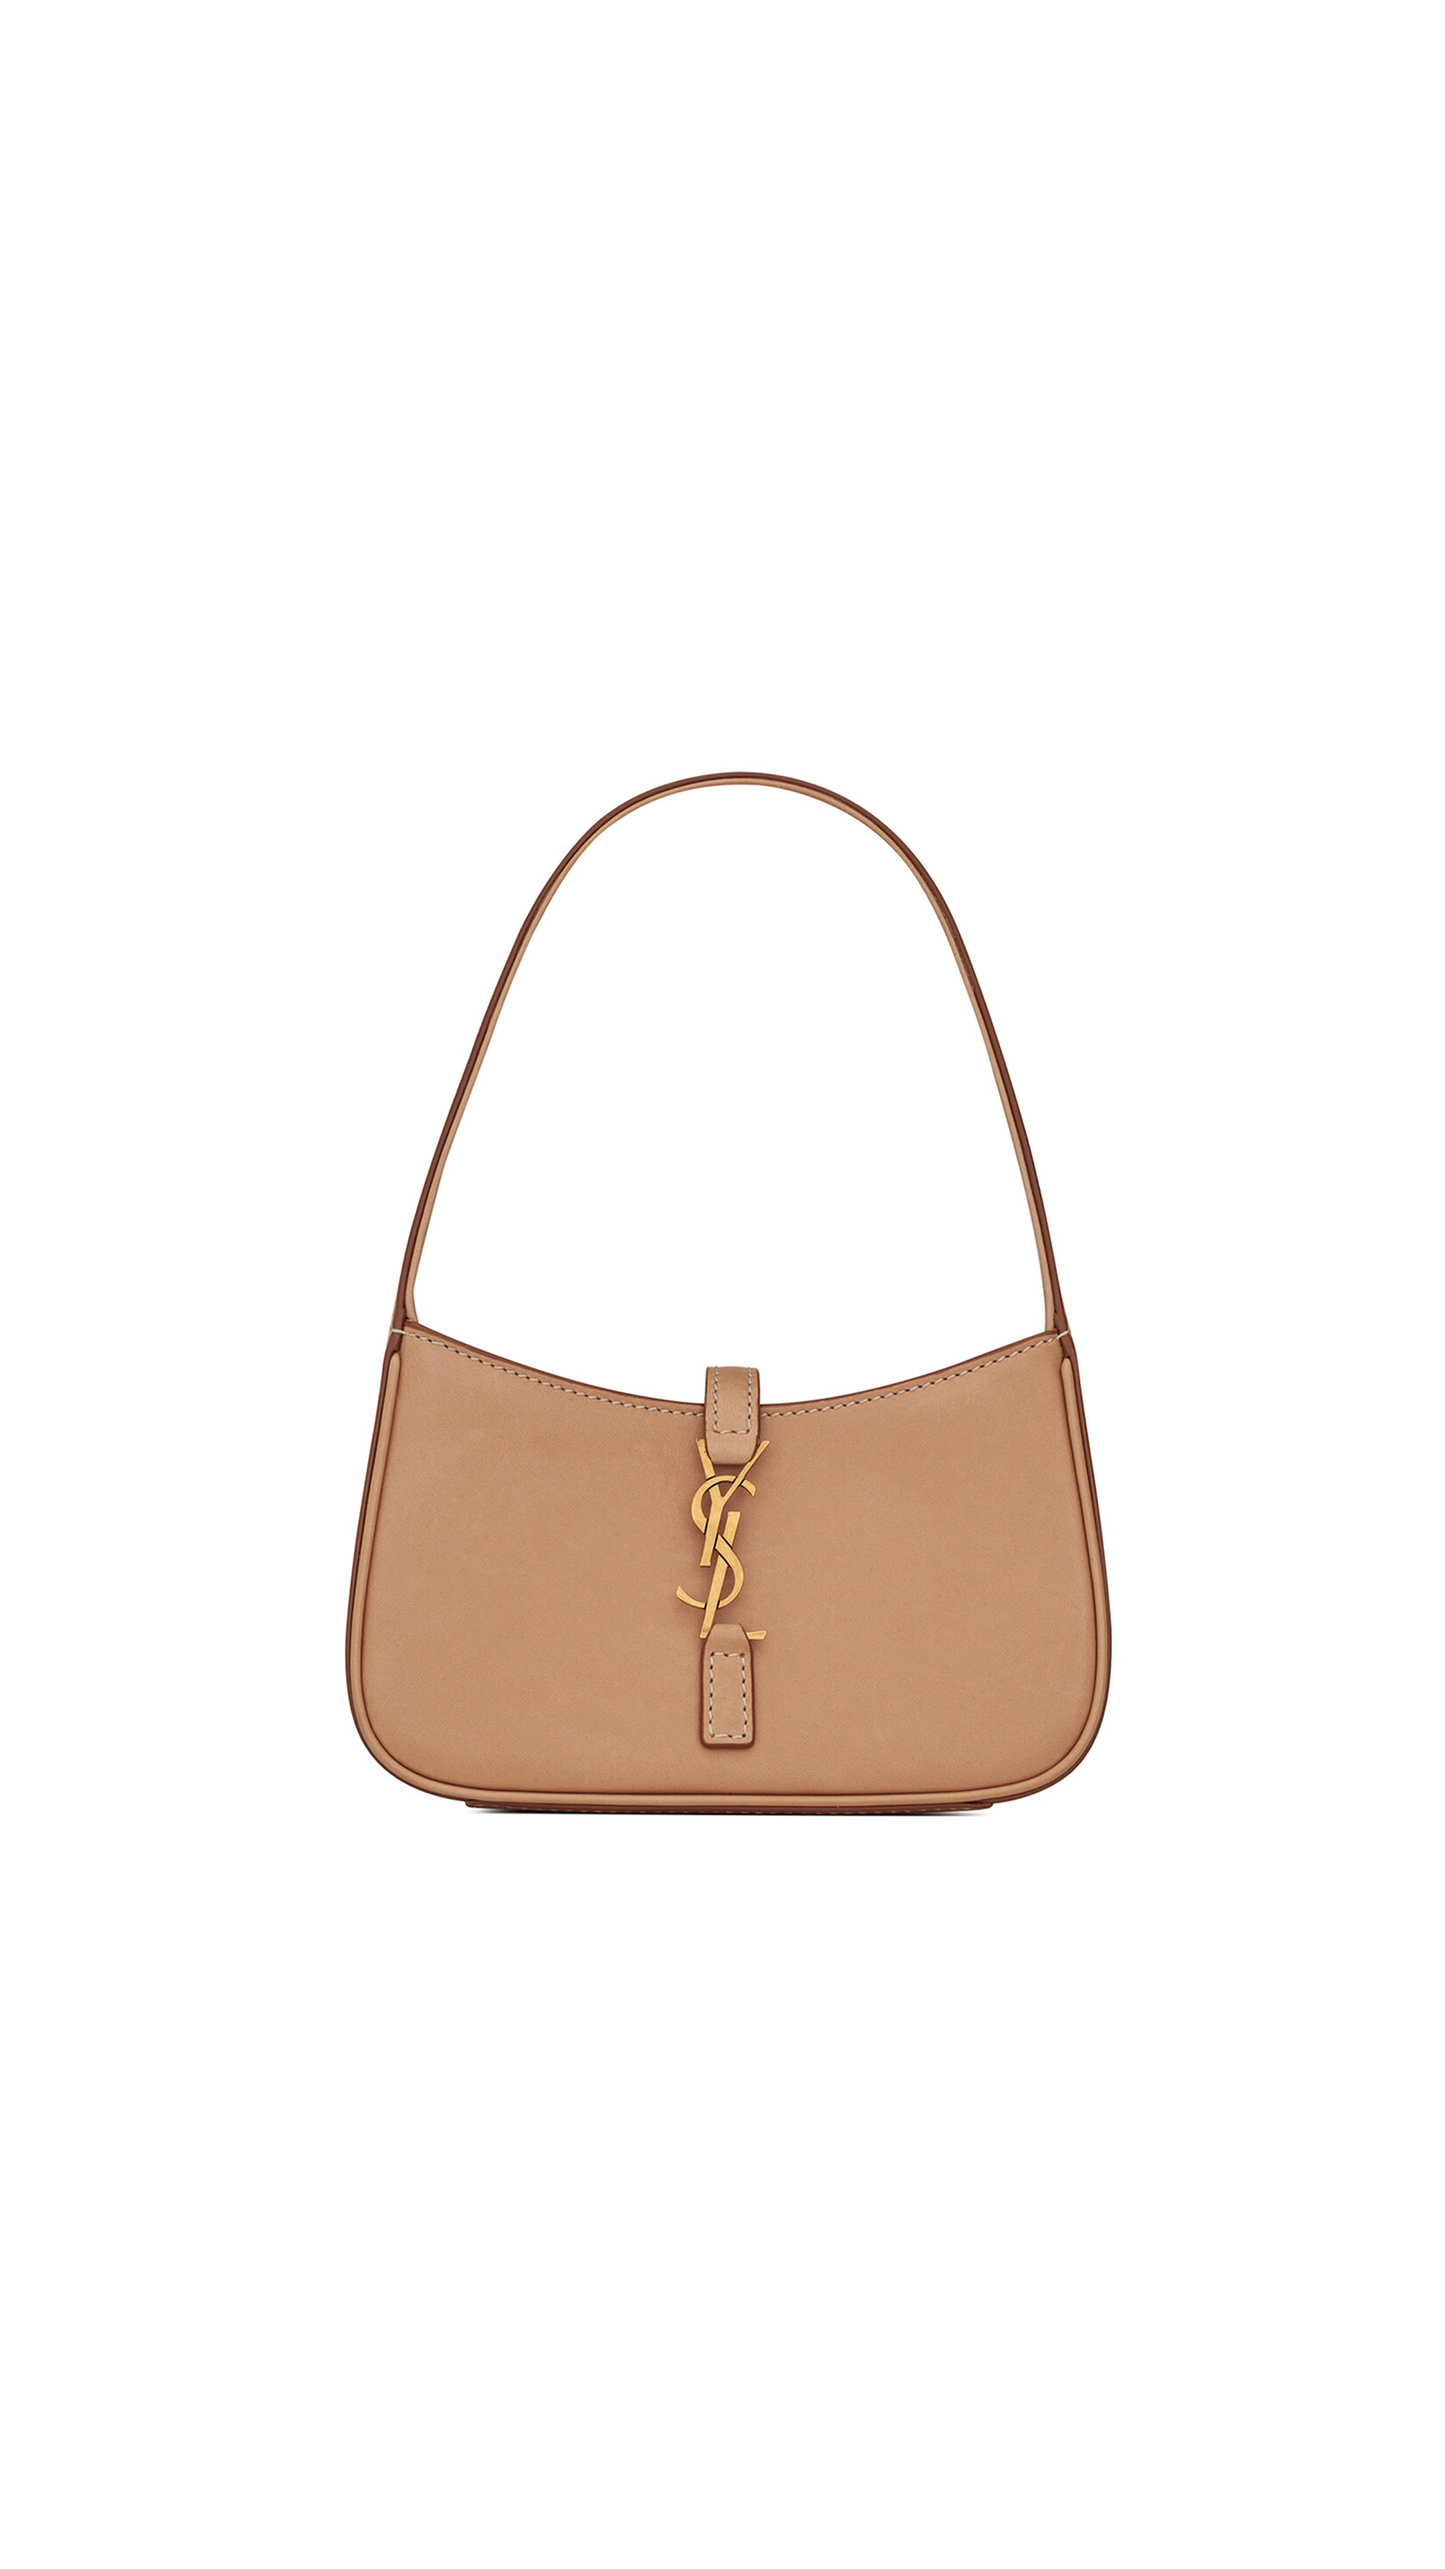 Le 5 À 7 Mini Hobo Bag in Smooth Leather - Brown Gold